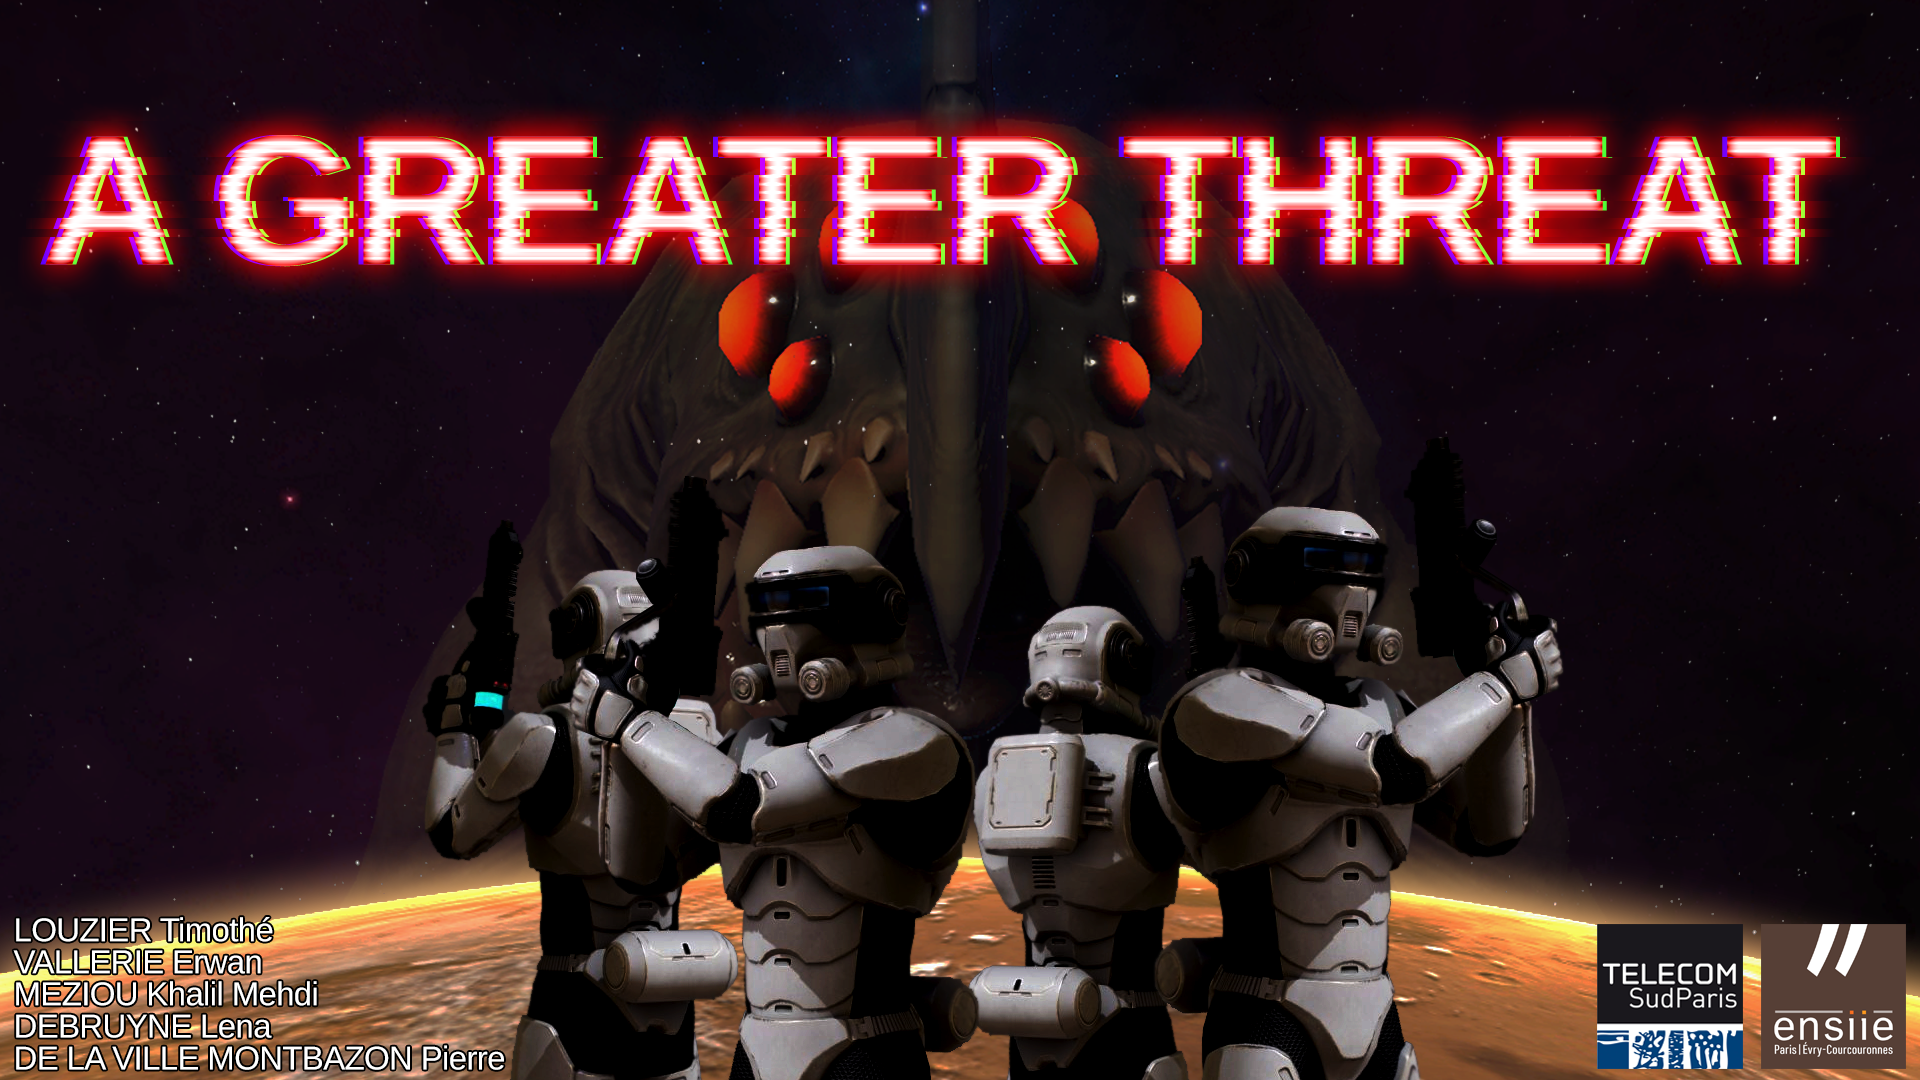 A Greater Threat